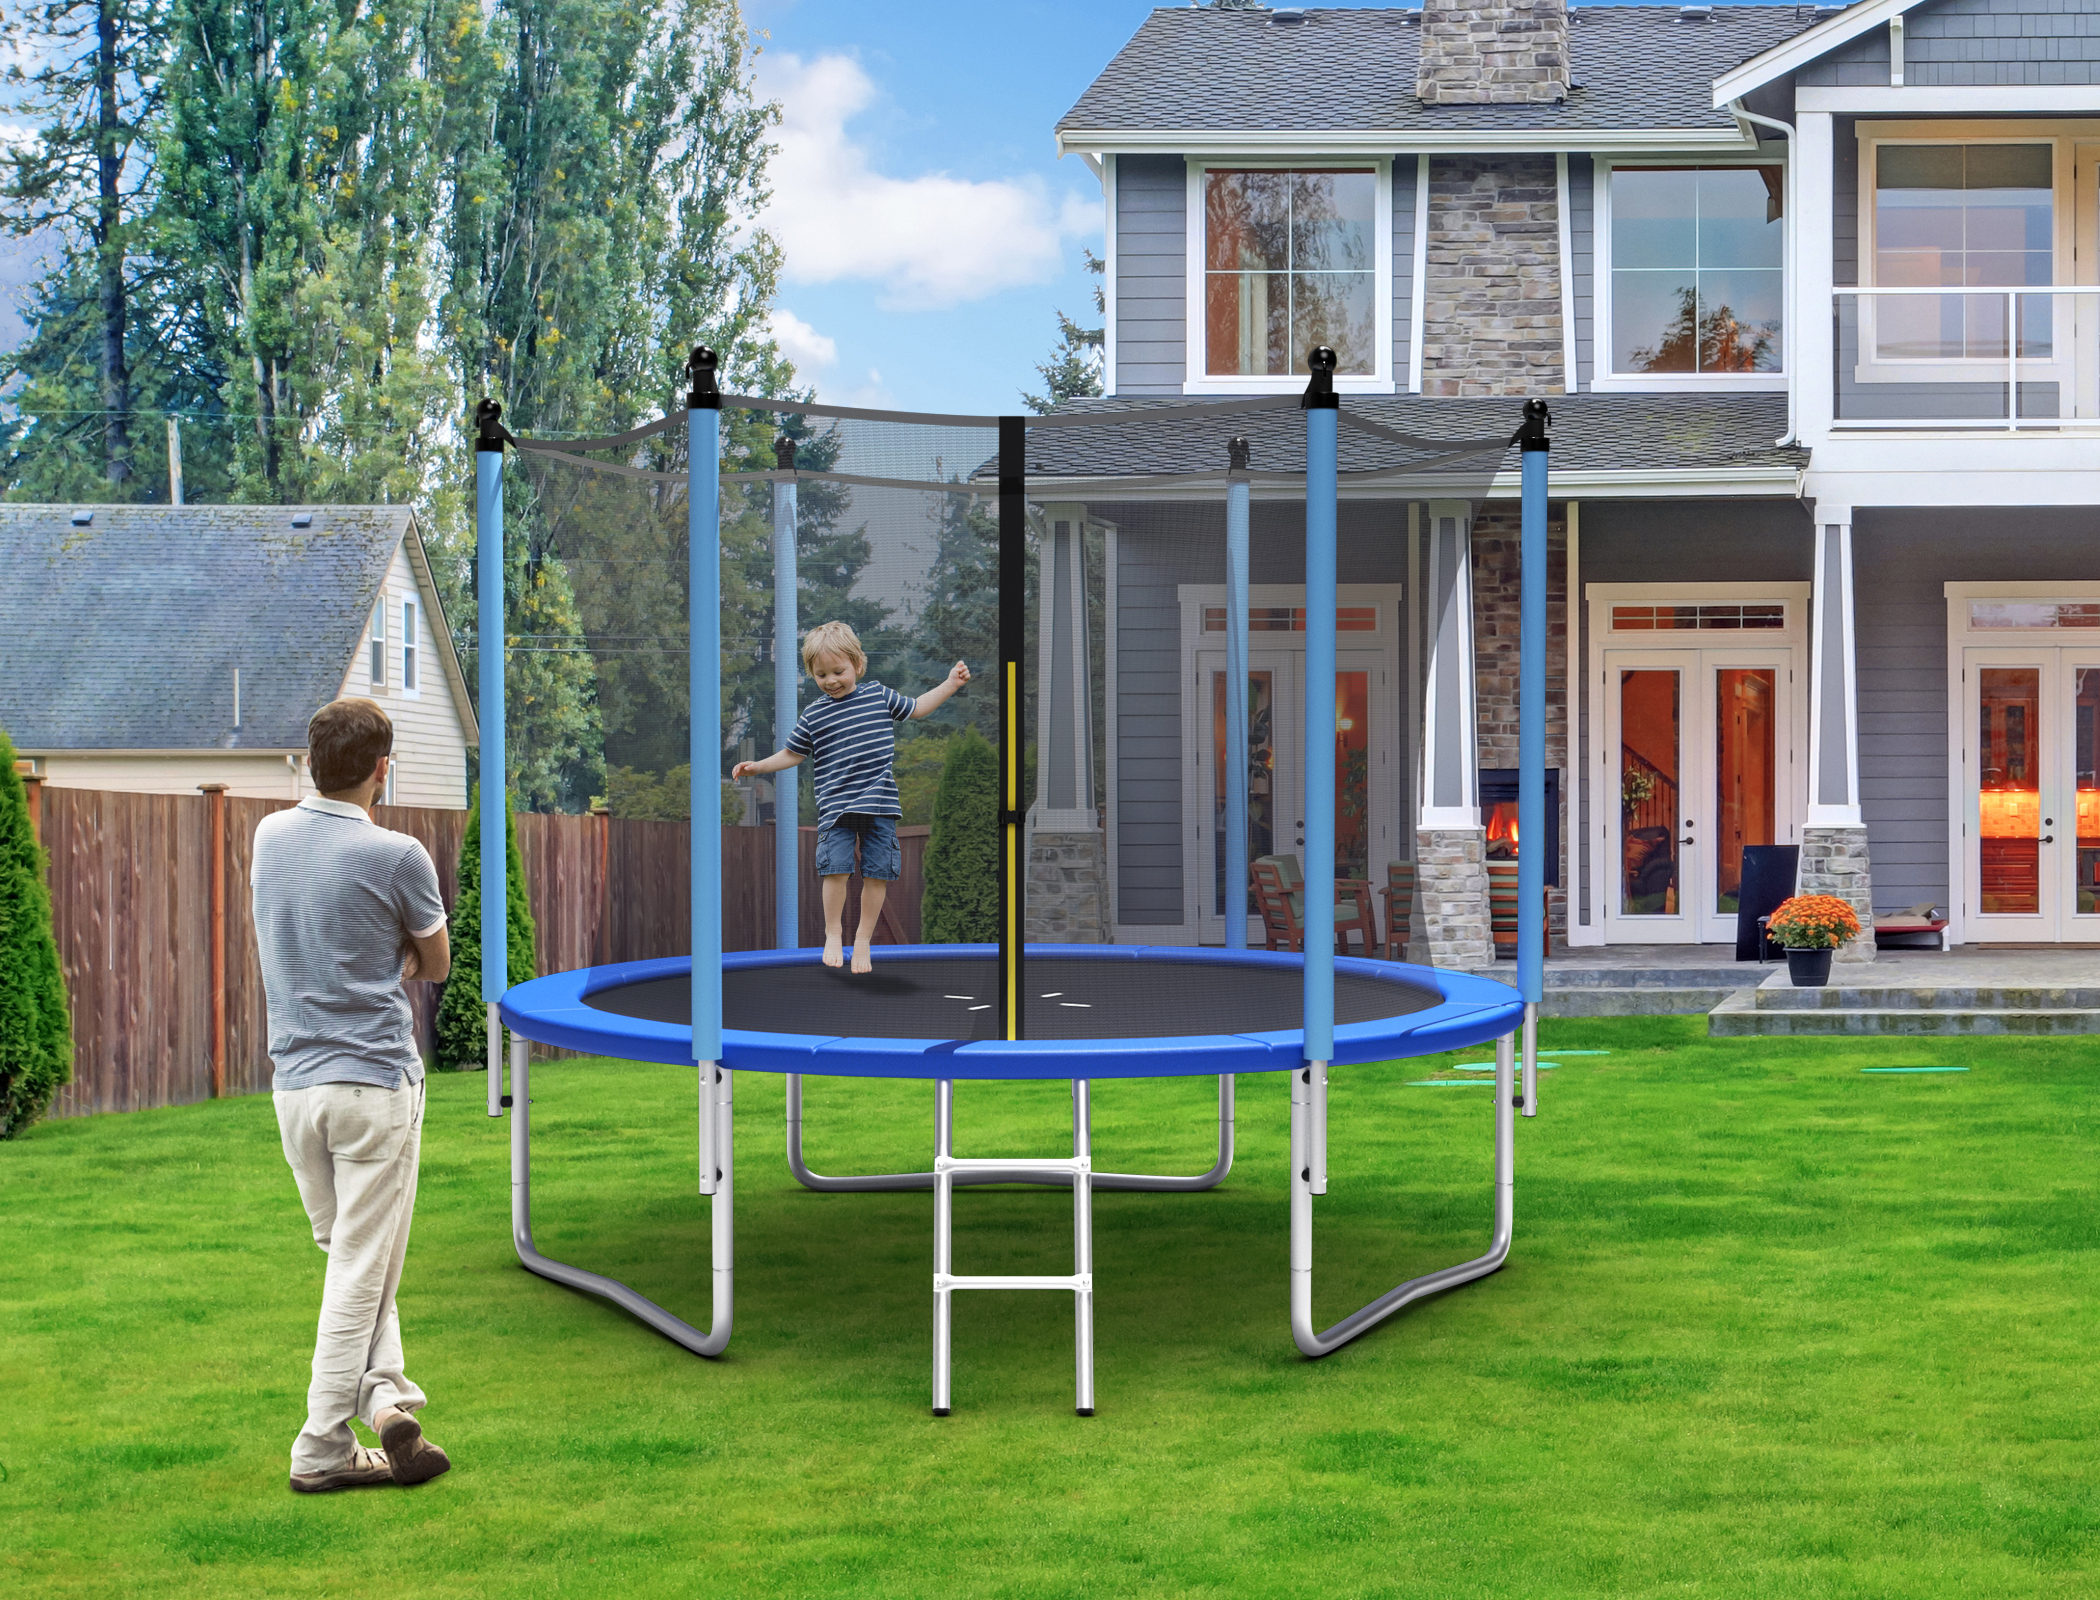 Topbuy Patiojoy 10Ft Jumping Exercise Recreational Trampolines with Enclosure Net